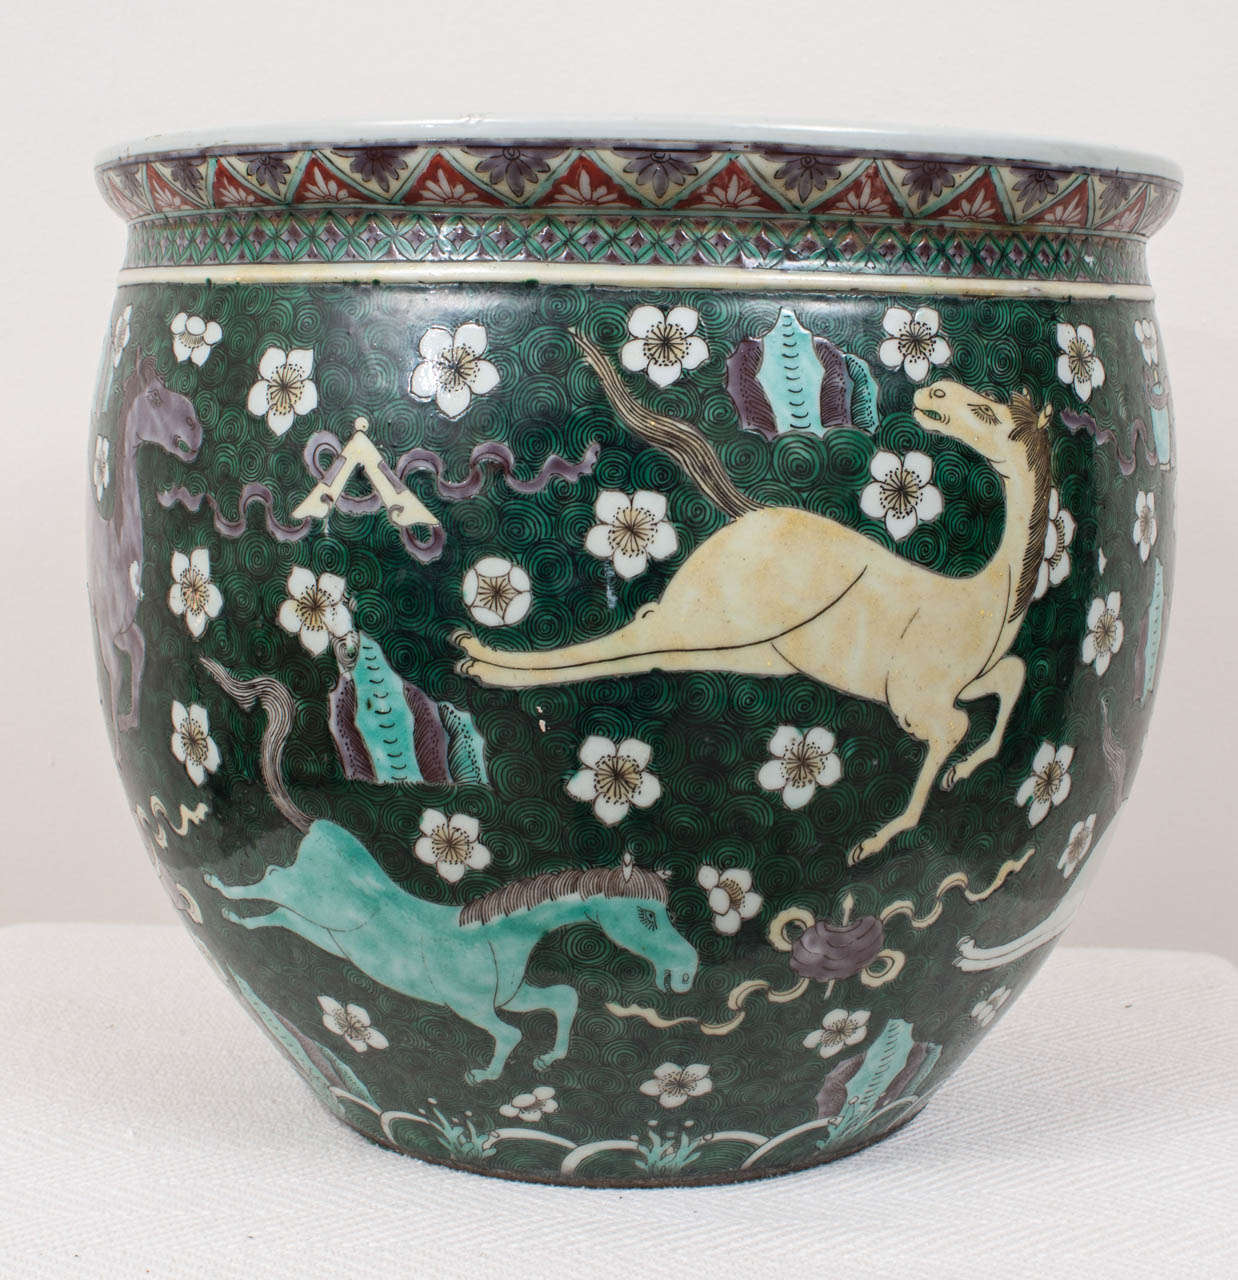 Unusual decoration of galloping horses; gorgeous color palette of deep leaf green, aubergine, turquoise, and ecru.